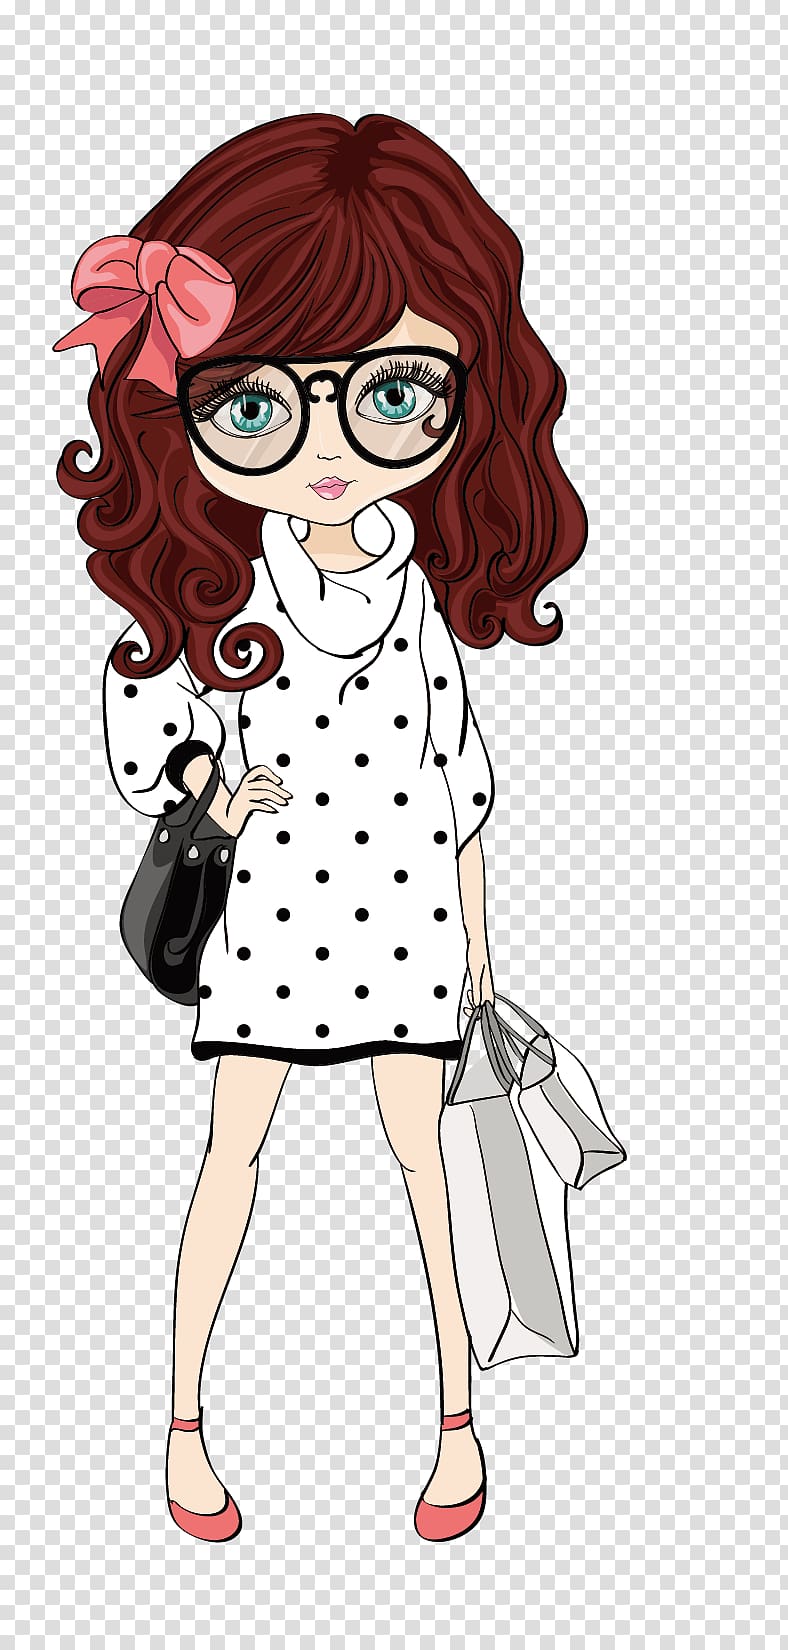 woman with white dress holding bags and wearing eyeglasses illustration, Drawing Girl Illustration, Quiet girl transparent background PNG clipart